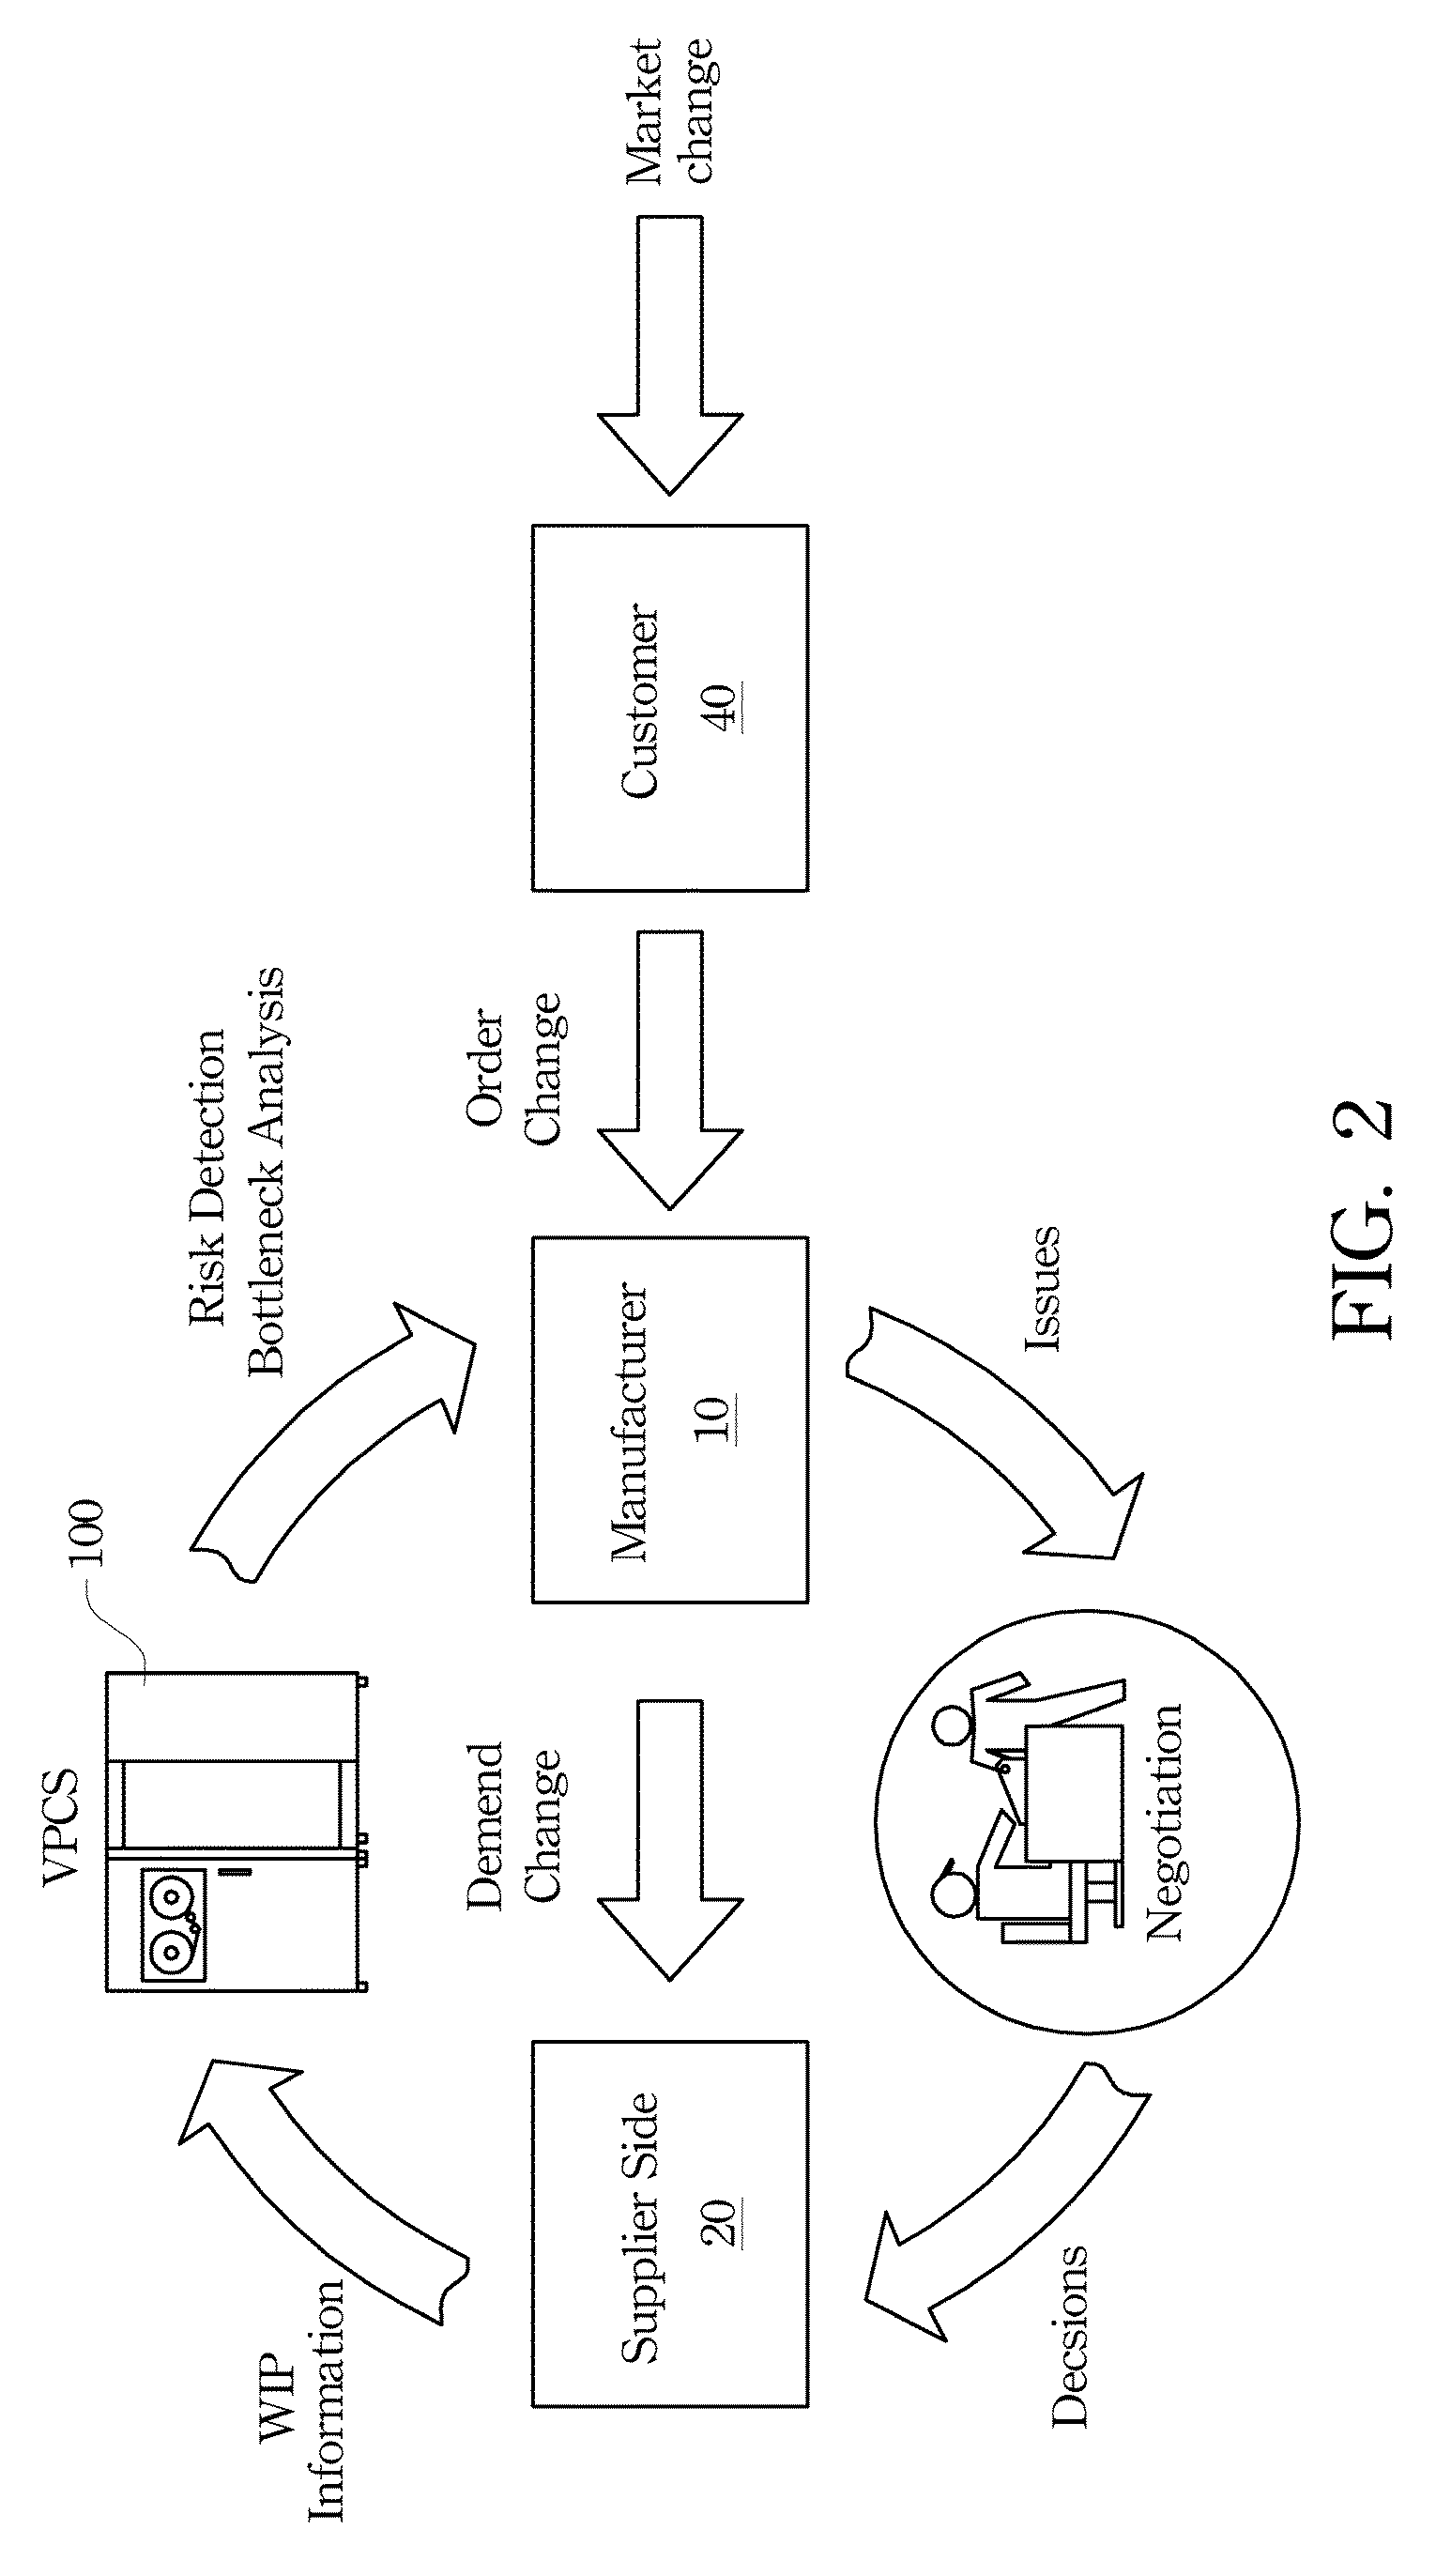 Virtual production control system and method and computer program product thereof